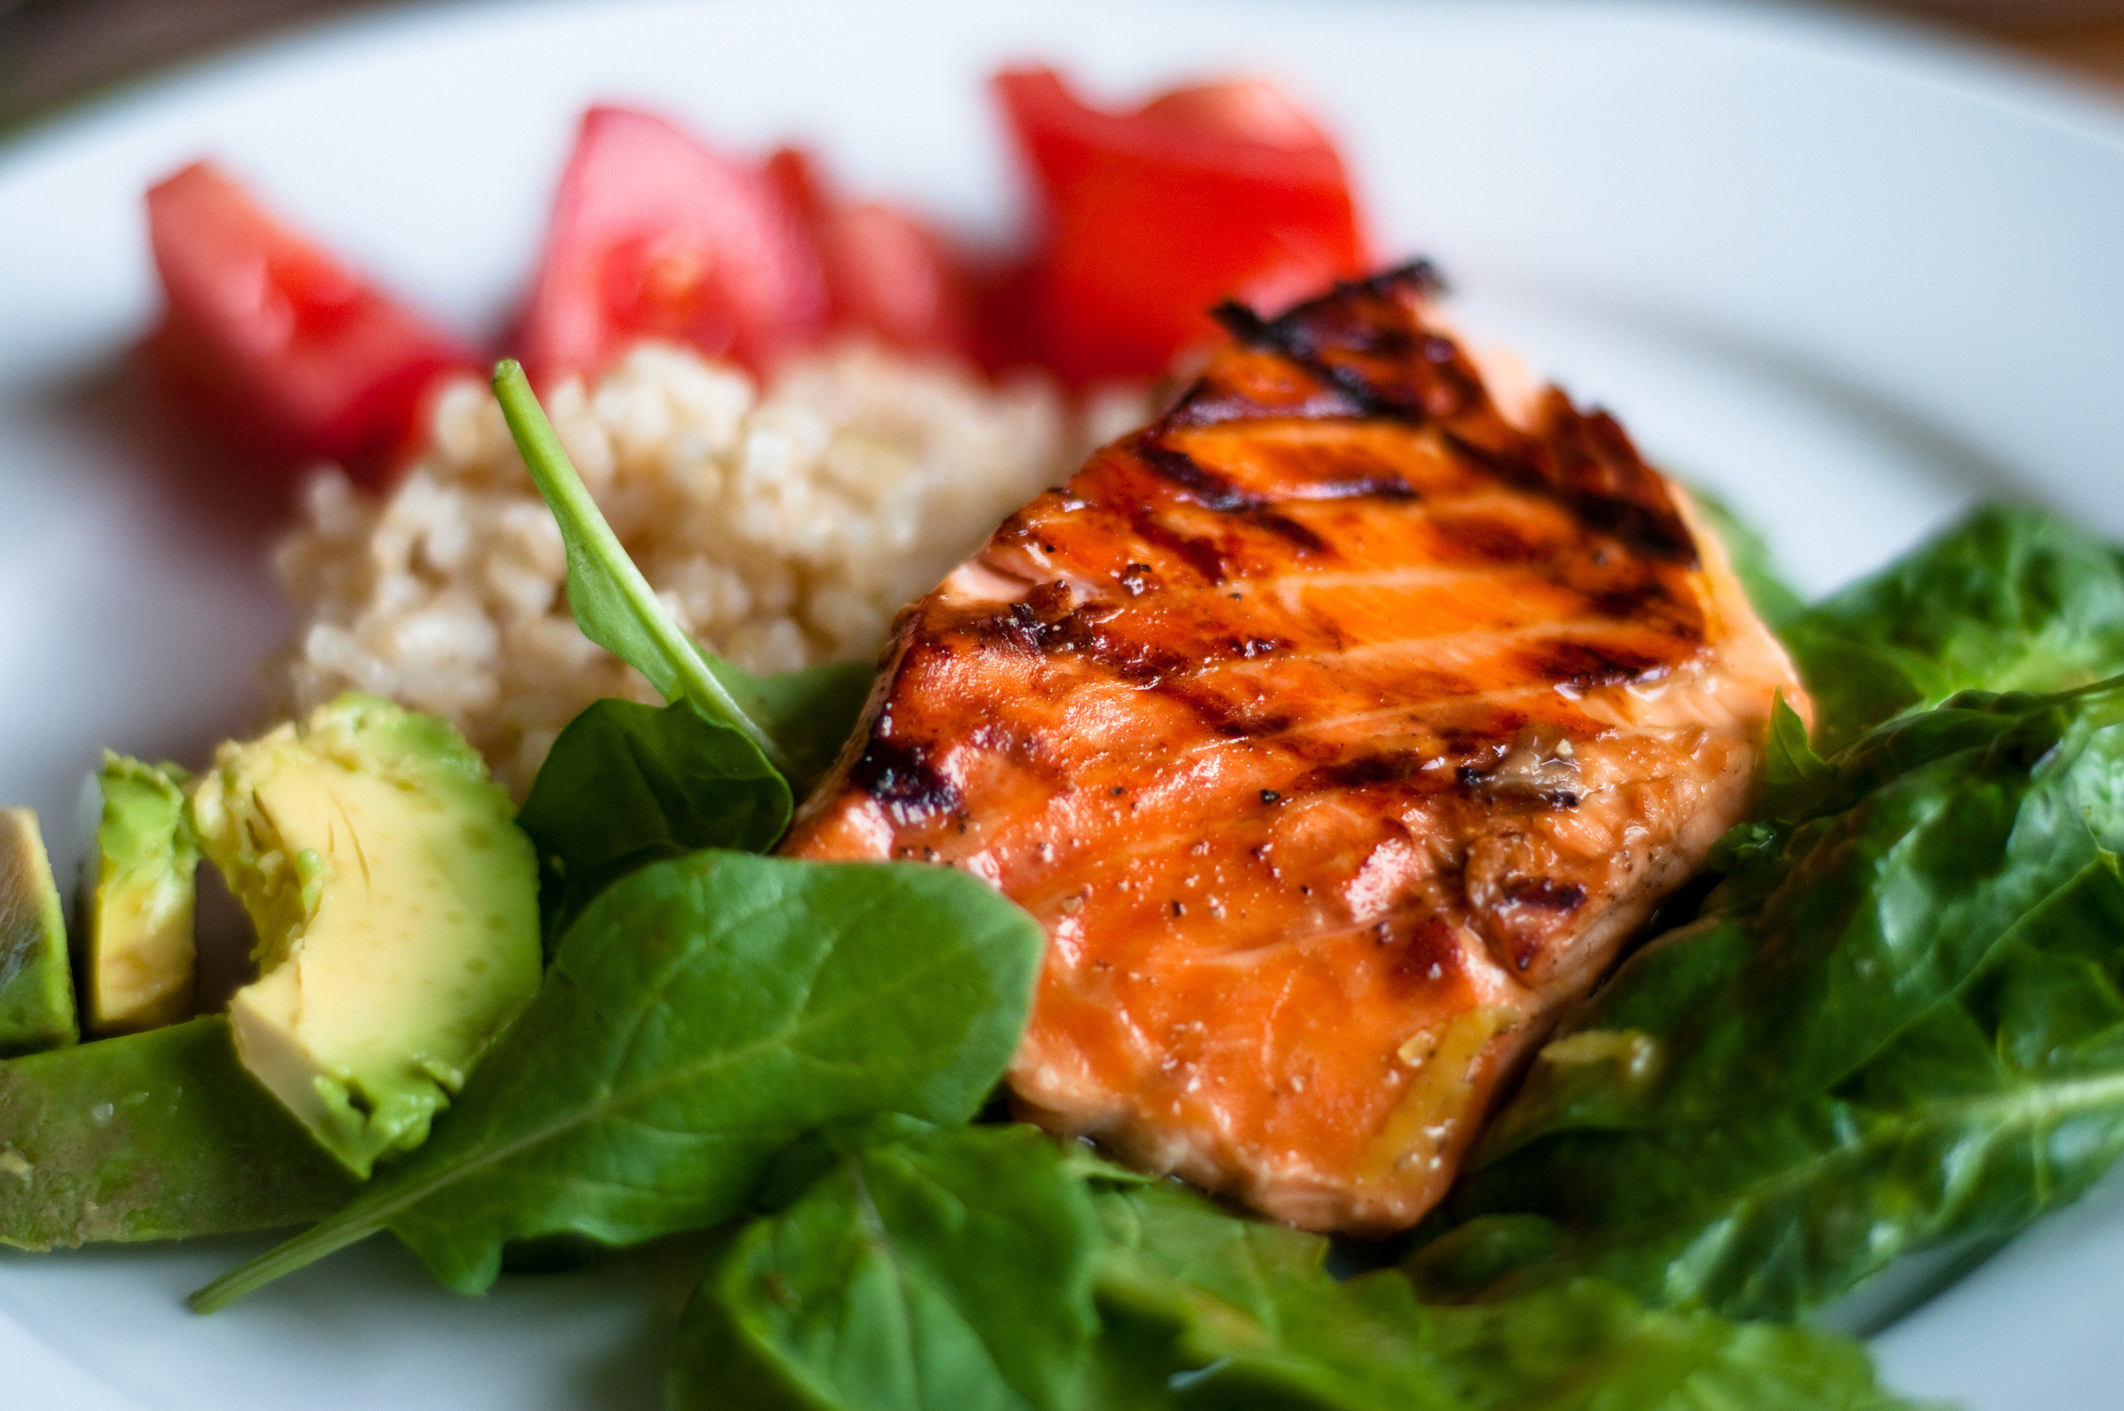 Salmon over lettuce with avocado.